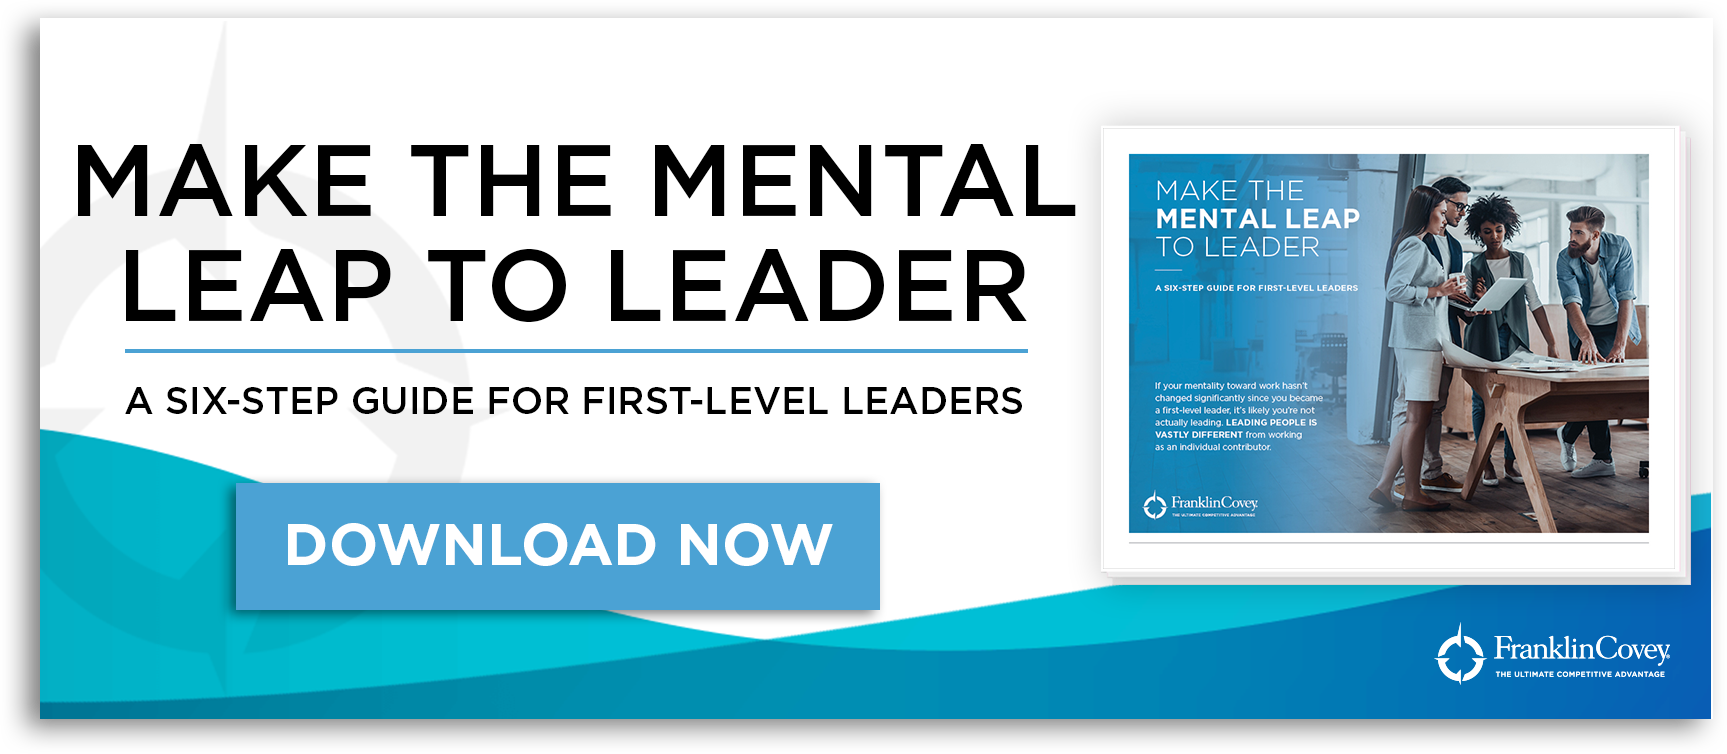 make the mental leap to leader